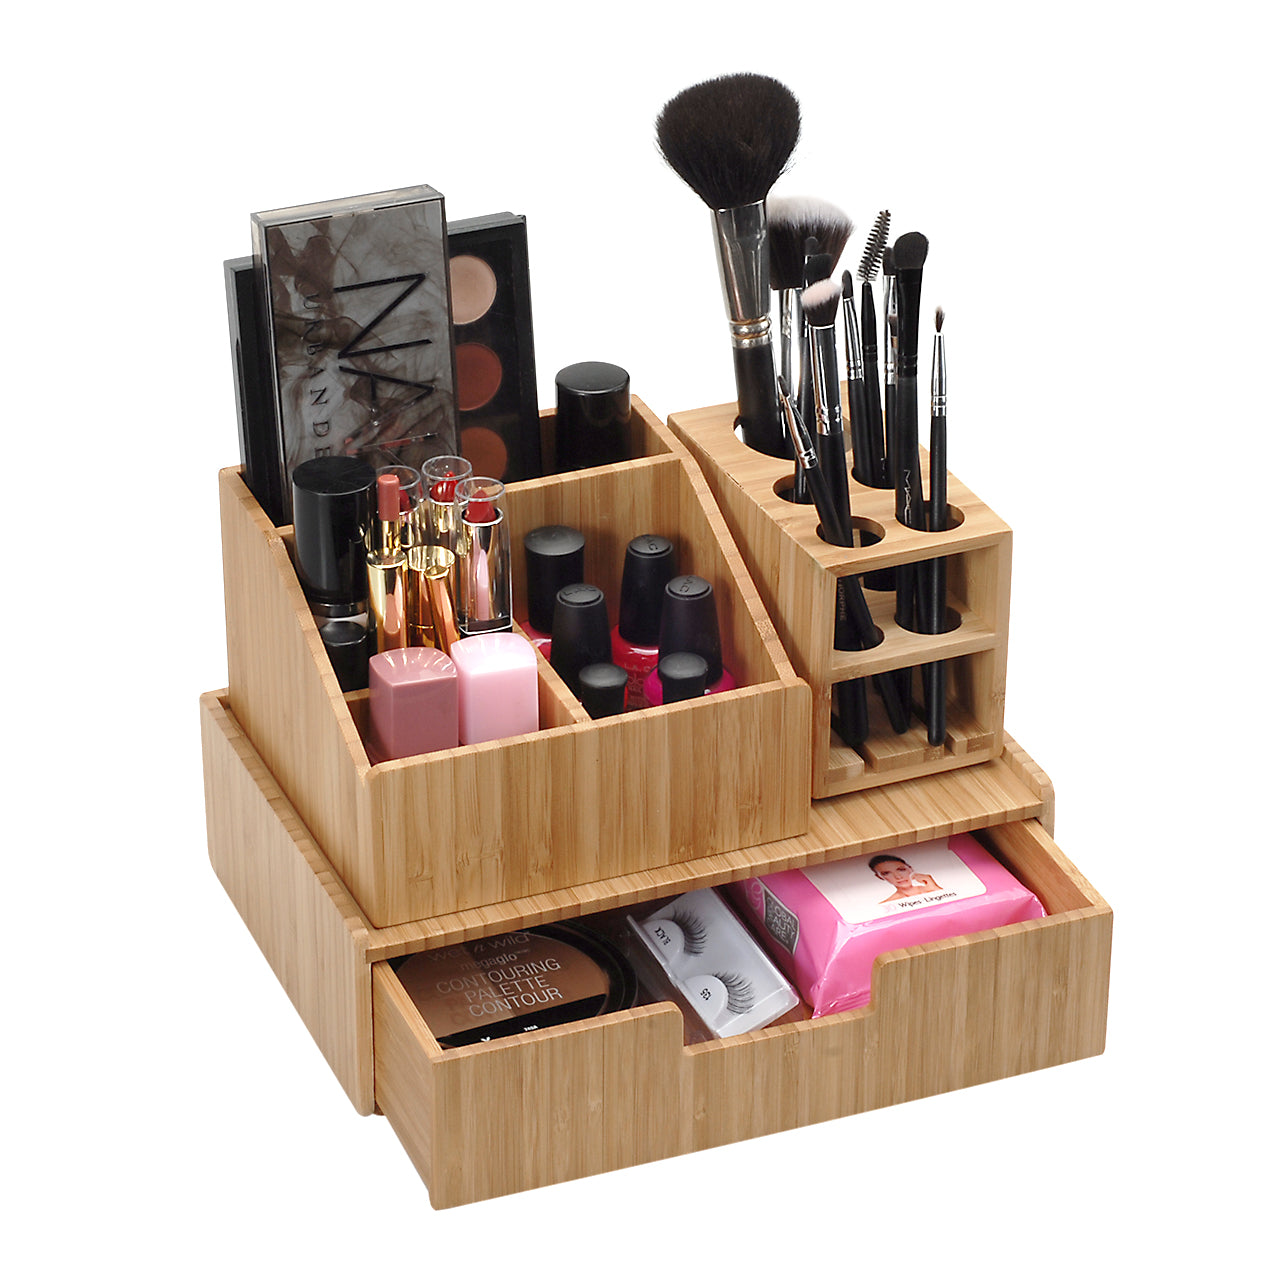 Mobilevision Bamboo Makeup Organizer Complete Combo, 3 PC Set Includes: 5 Section Brush Holder, 4 Compartment Cosmetic Caddy & Drawer for Added